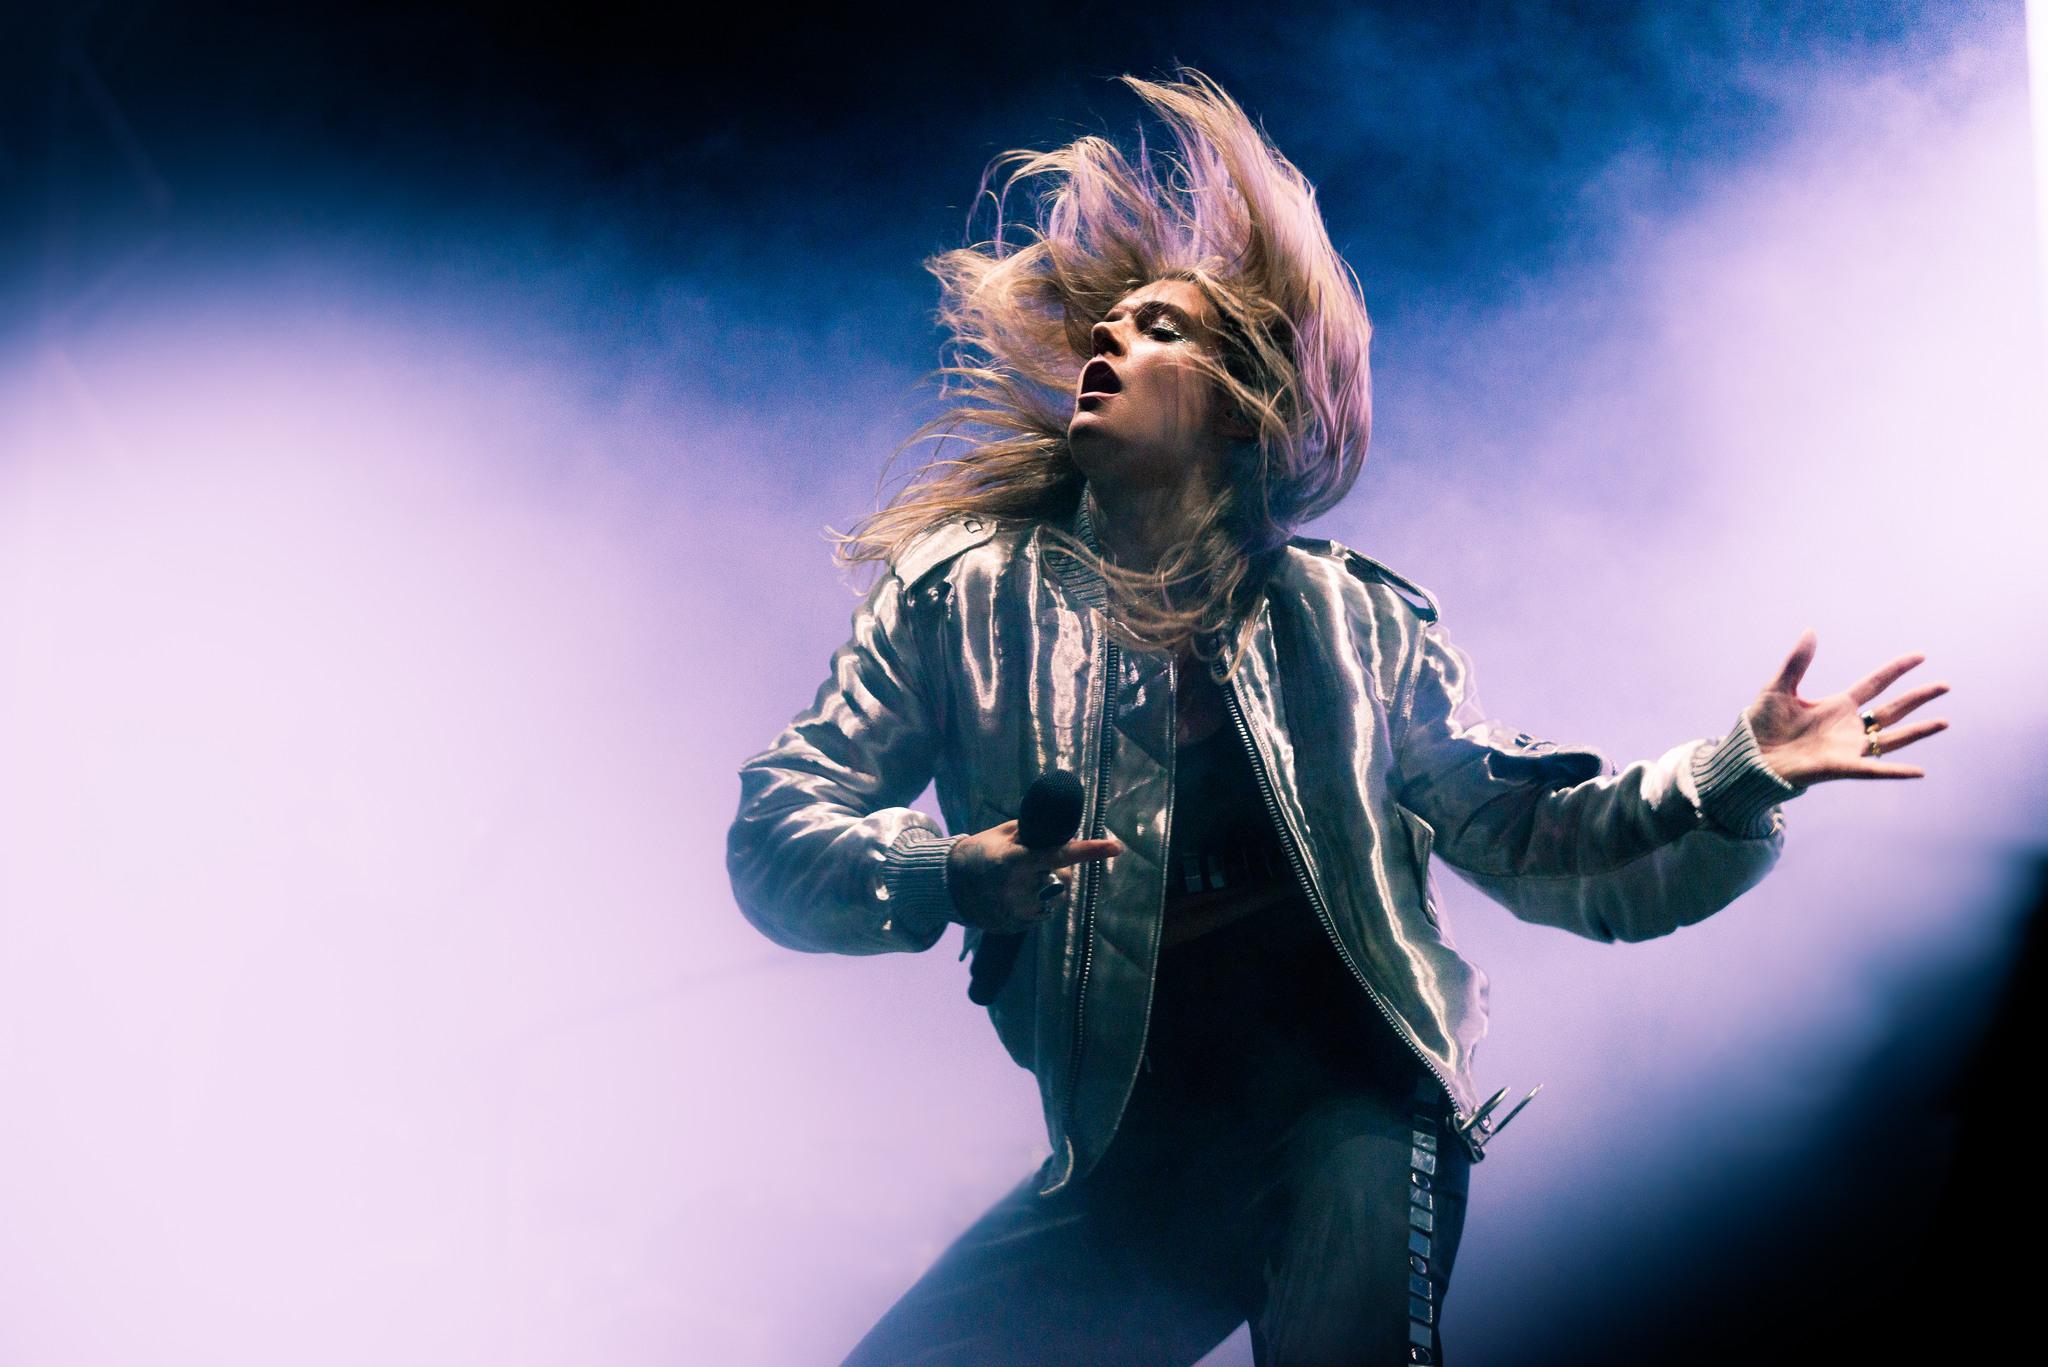 Woman with long hair and microphone on a stage. Tove Lo has been selected to this list of Swedish women.